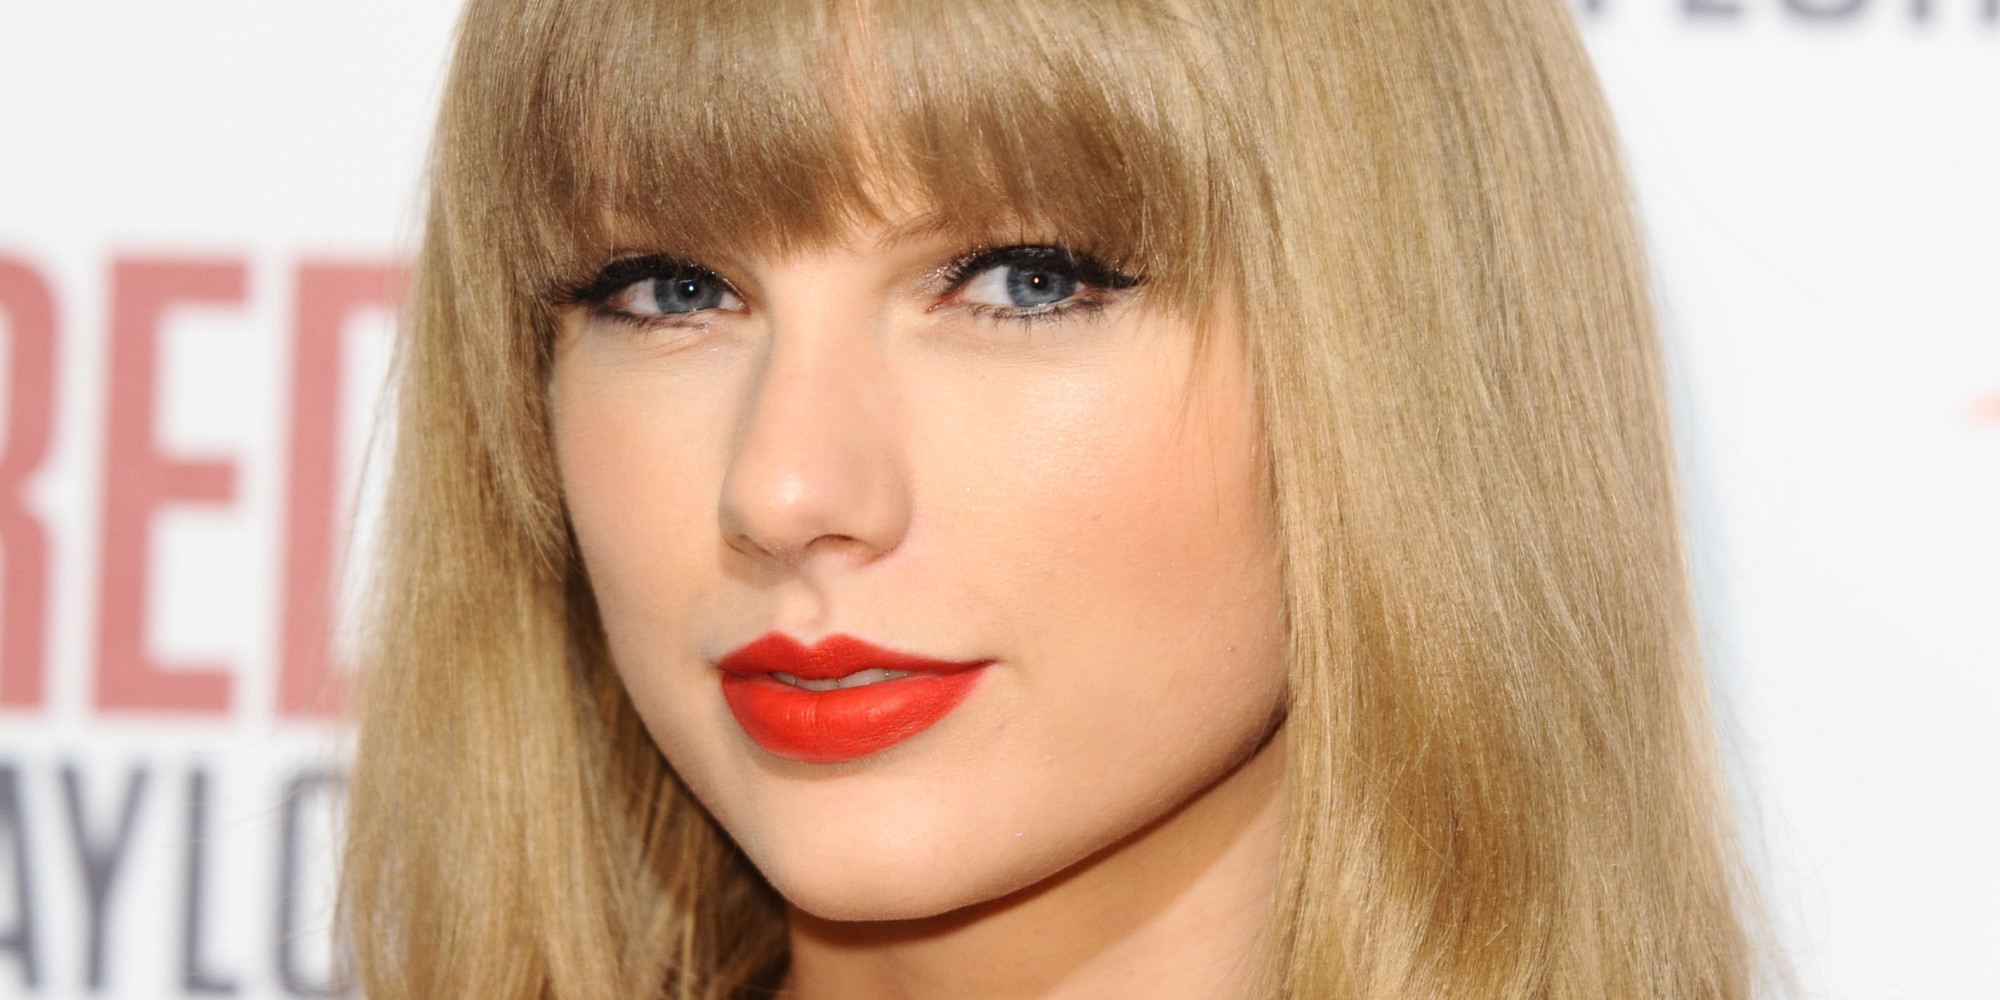 Taylor Swift News, Songs, New Album And Video Announcements, Tour